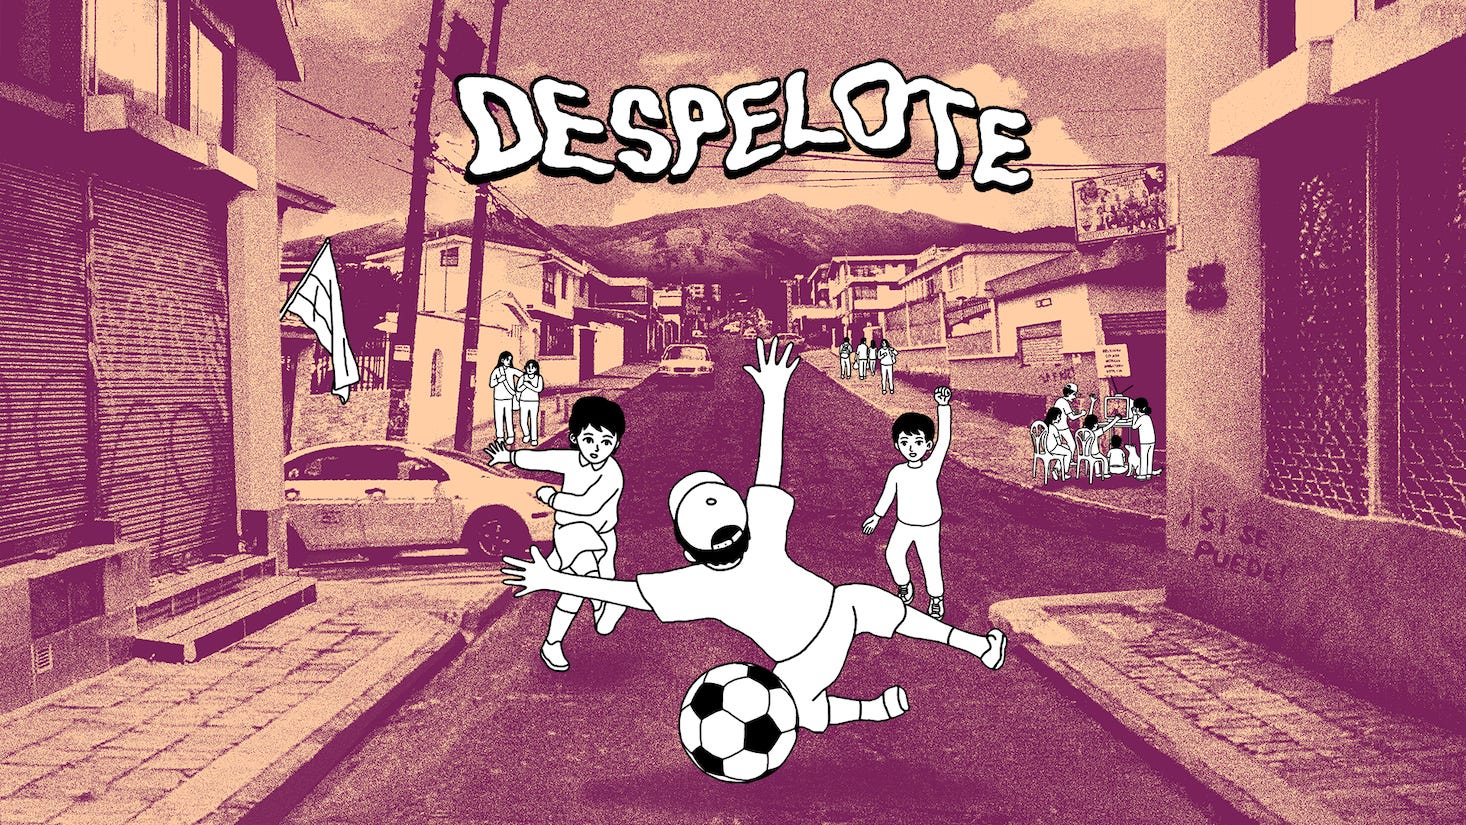 Despelote is a seriously nostalgic indie, taking us back to 2001’s Ecuador